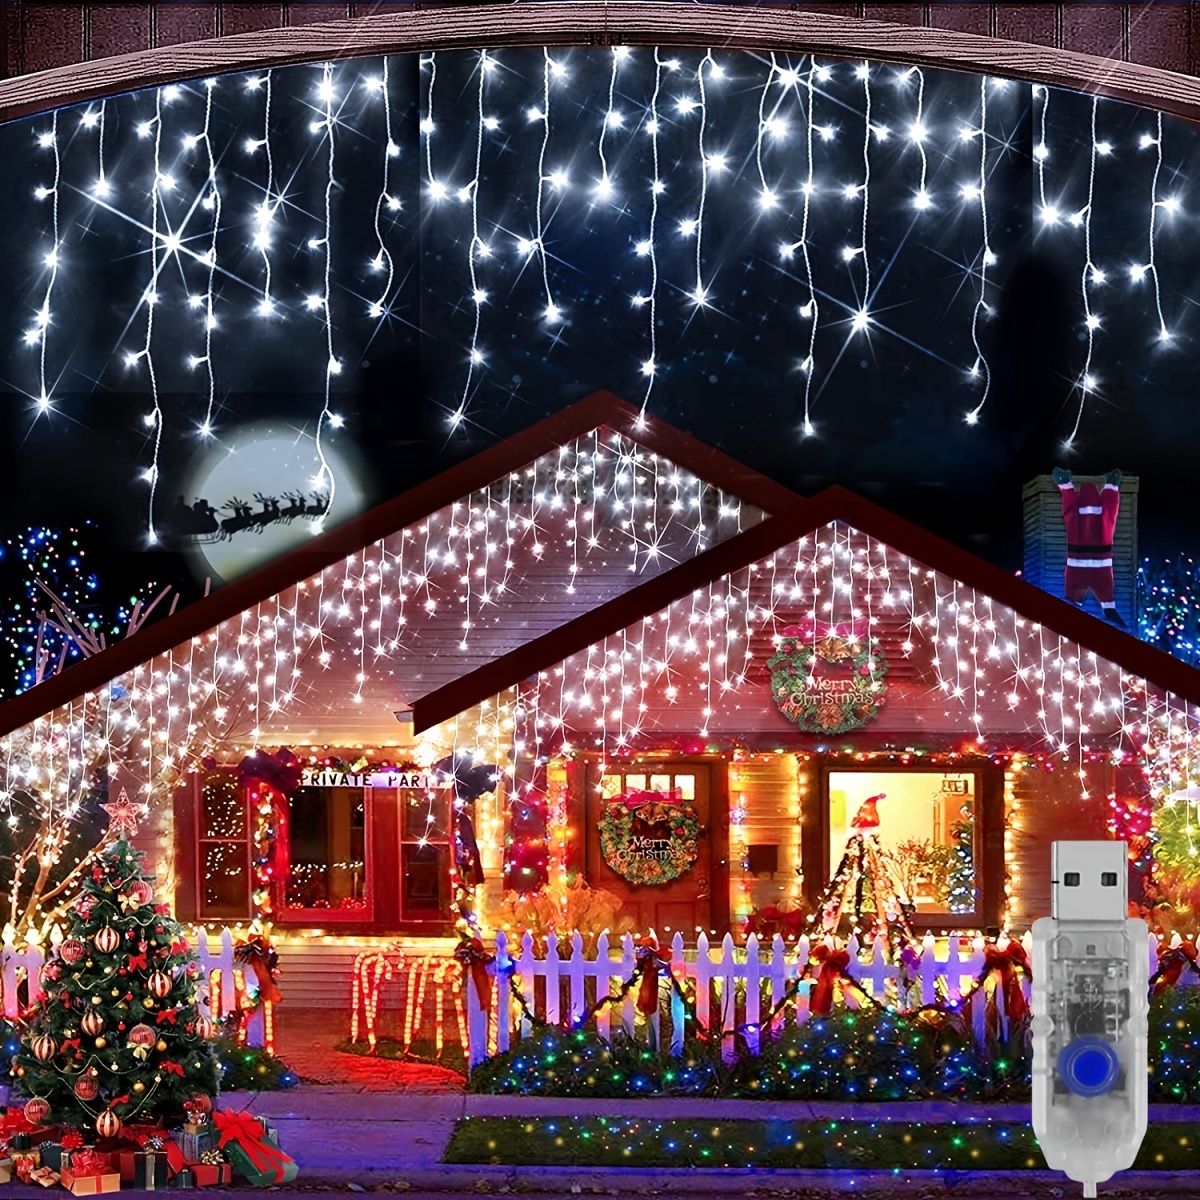 1pc icicle string light 8 modes waterproof usb powered led twinkle lights for patio garden tree fence yard party christmas holiday decorations details 0